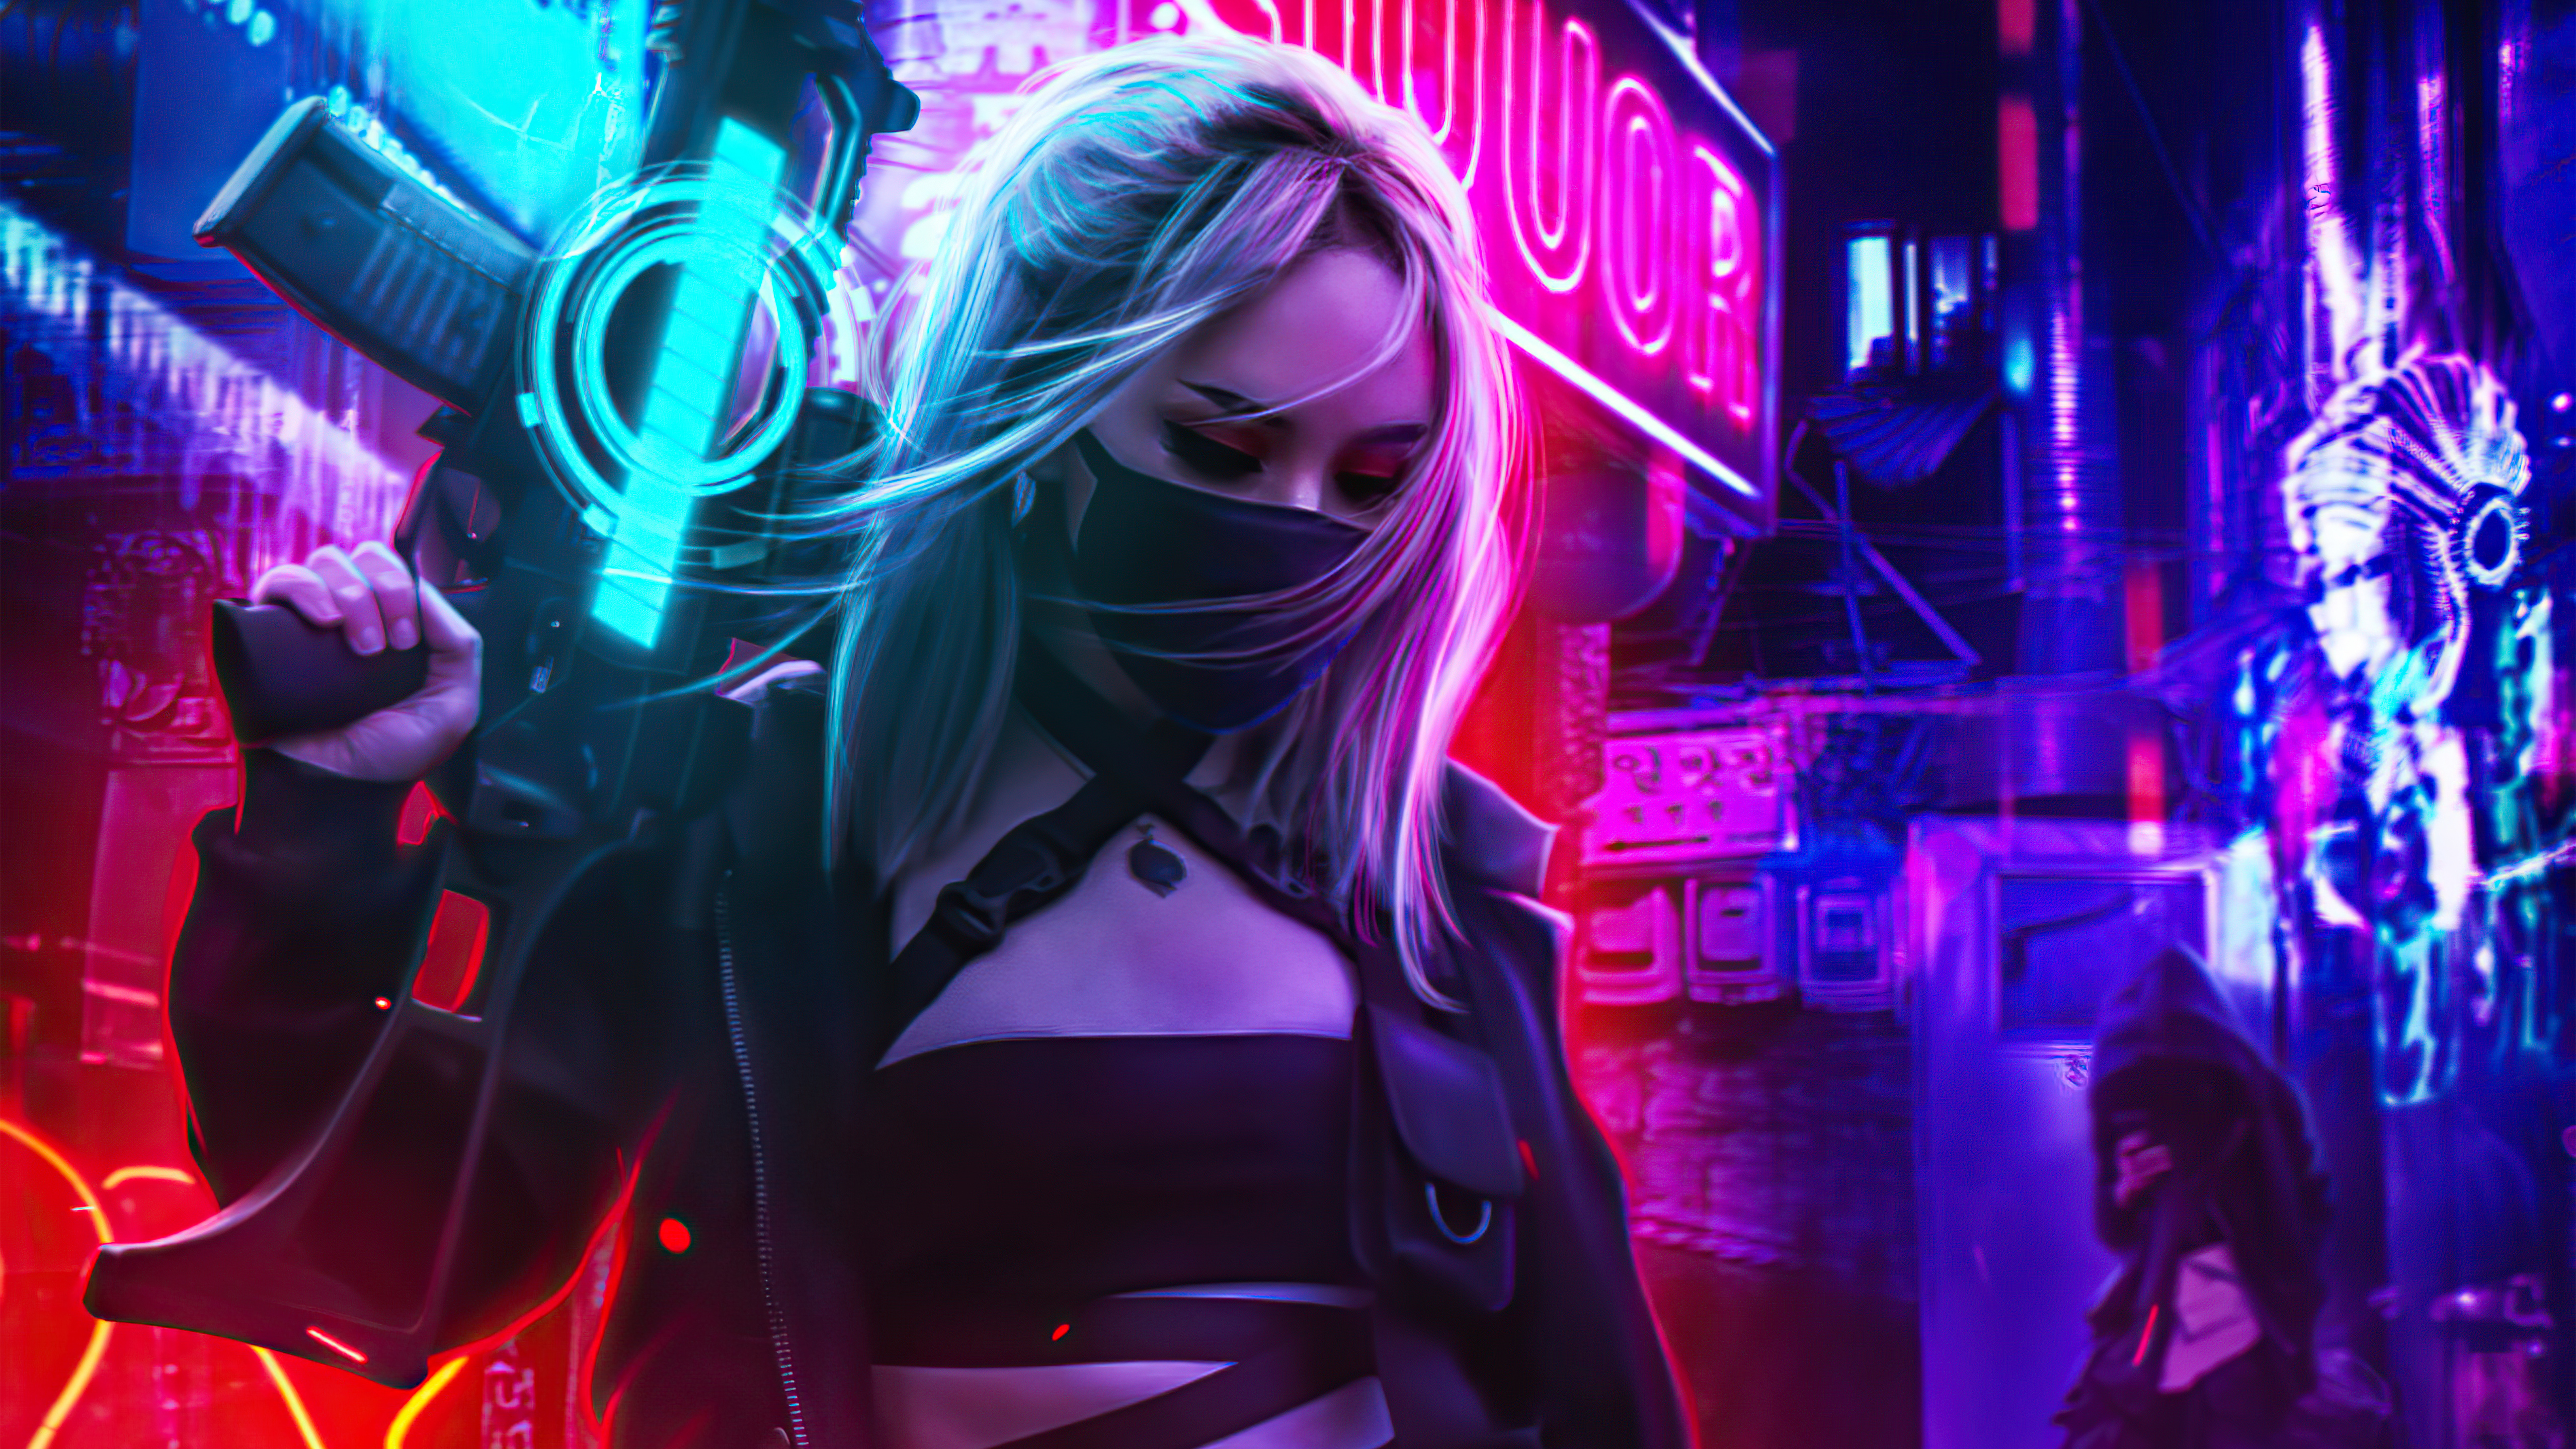 Cyberpunk Girl In Neon Mode 5k, HD Artist, 4k Wallpaper, Image, Background, Photo and Picture